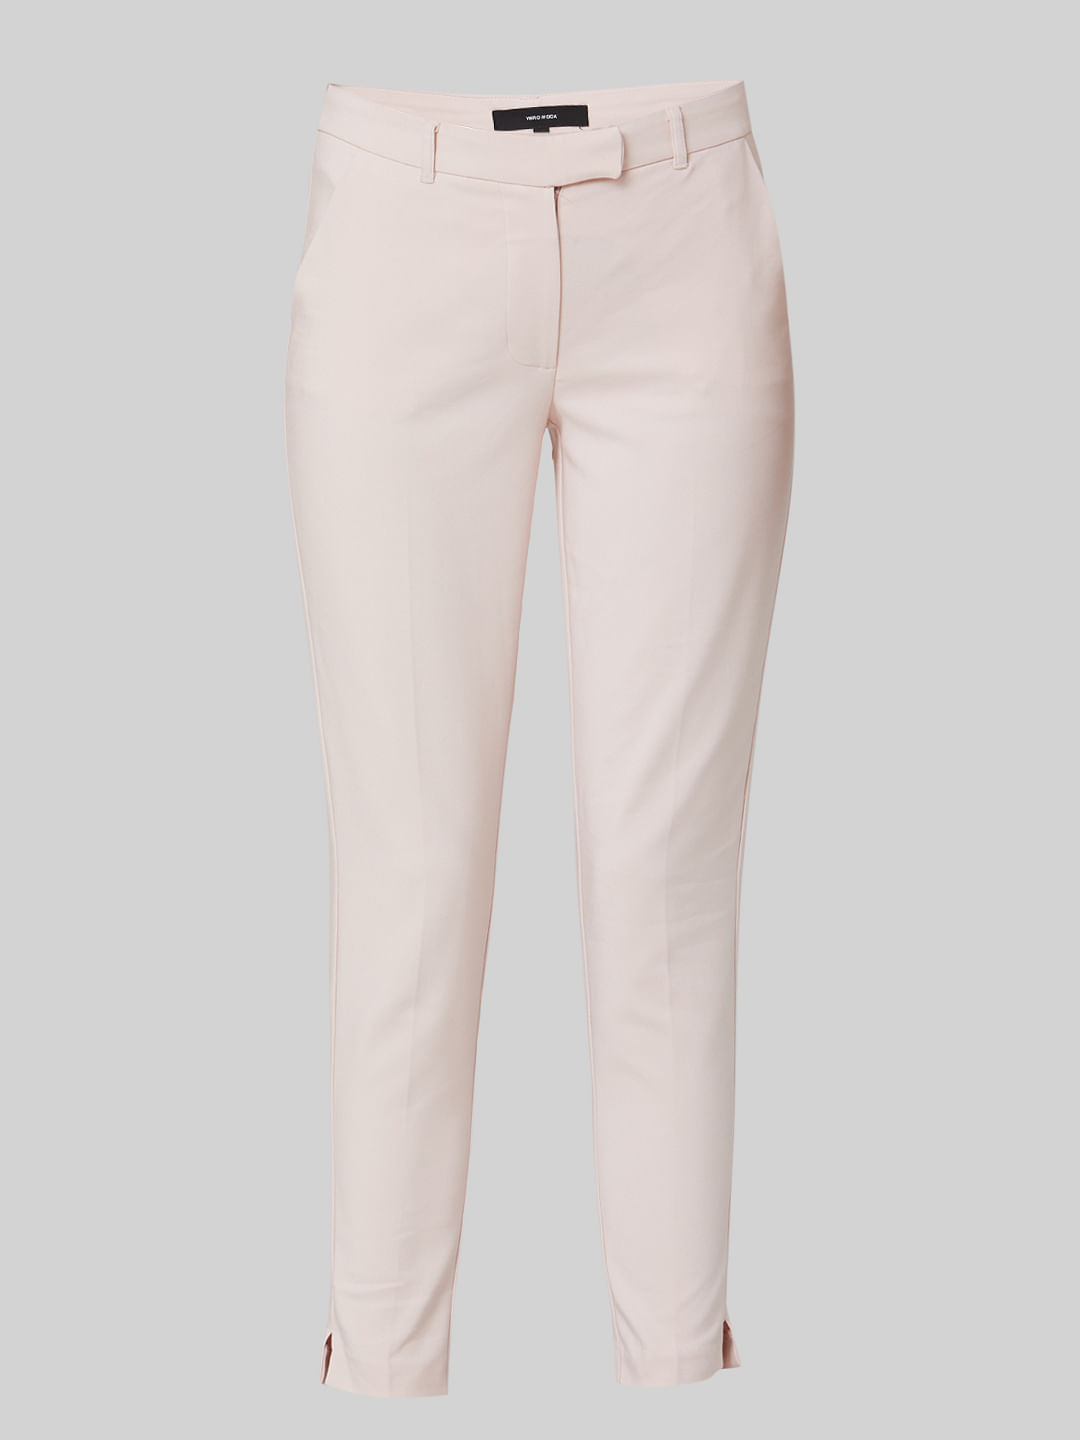 Pink Trousers  Buy Pink Trousers online in India